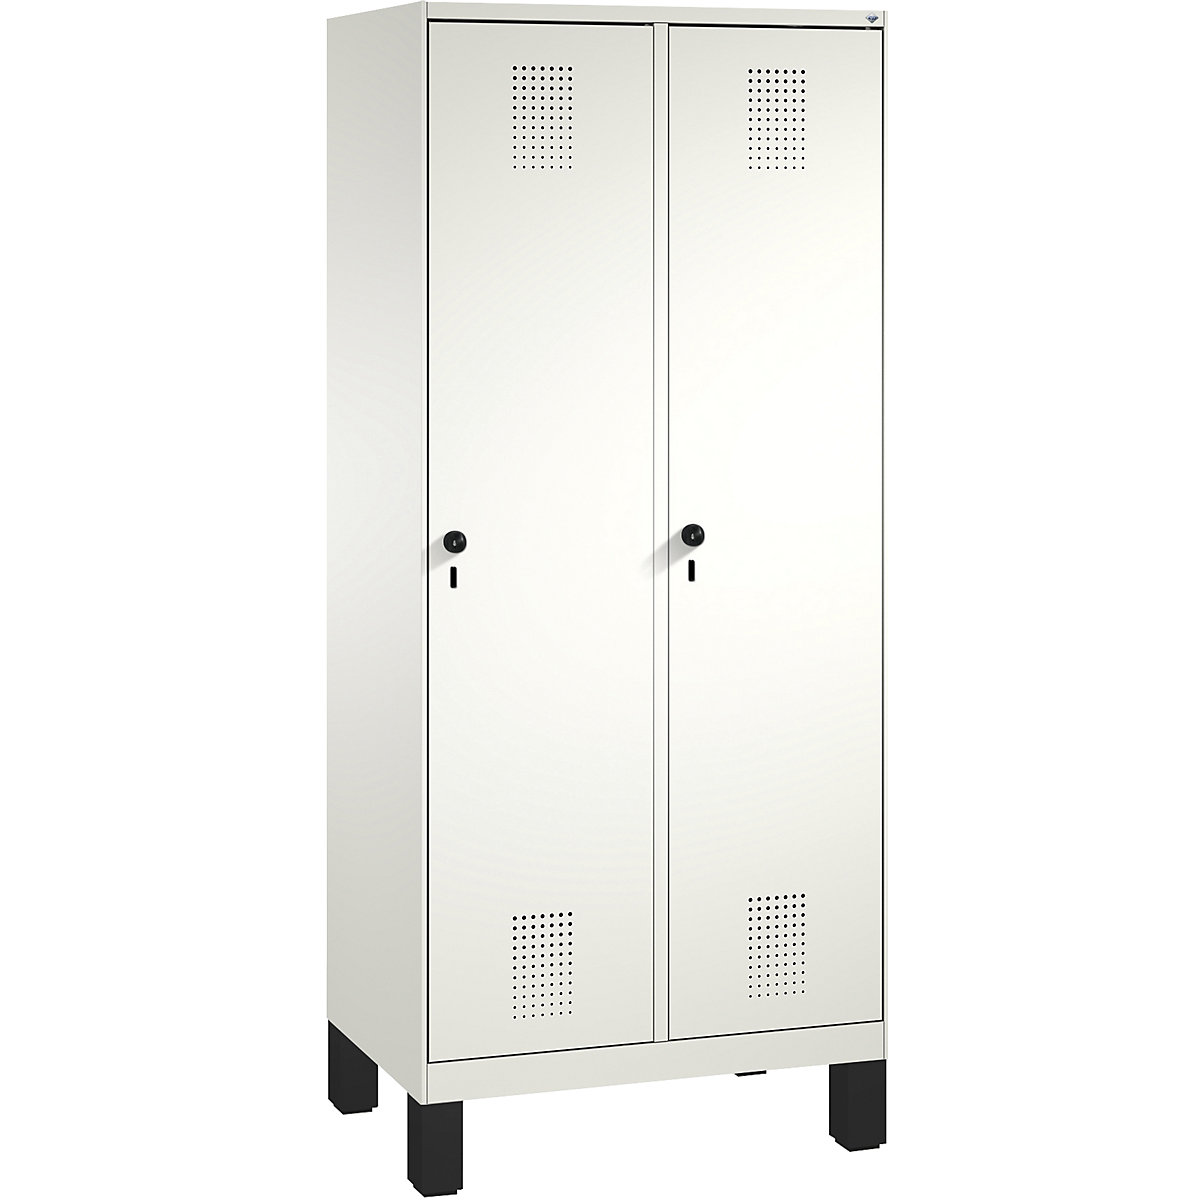 EVOLO cloakroom locker, with feet – C+P, 2 compartments, compartment width 400 mm, traffic white / traffic white-6